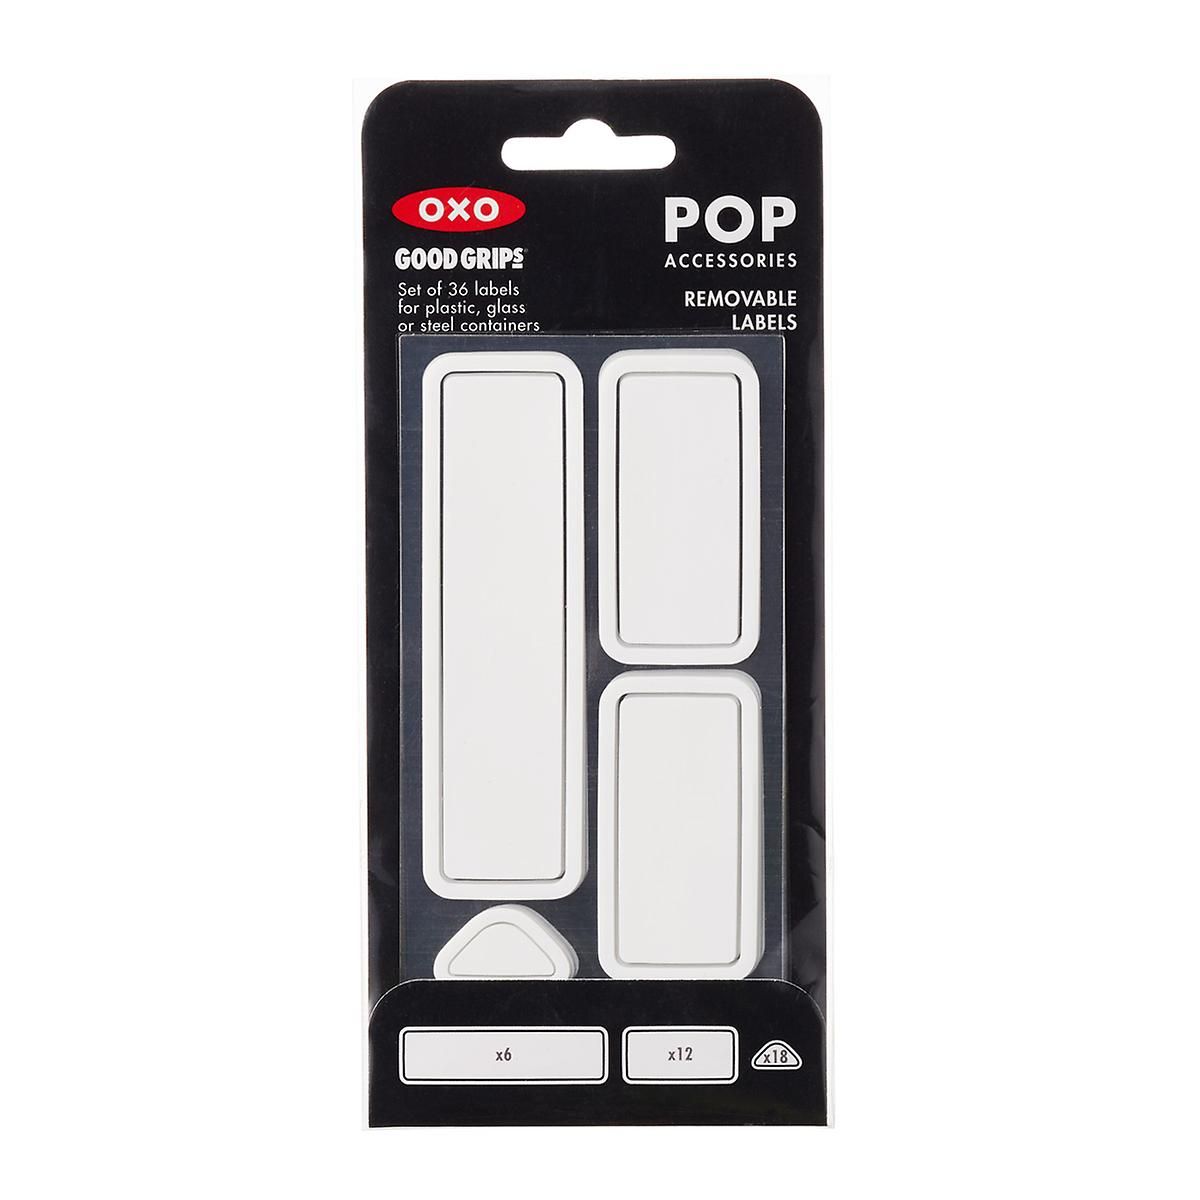 OXO Good Grips POP Removable Labels | The Container Store